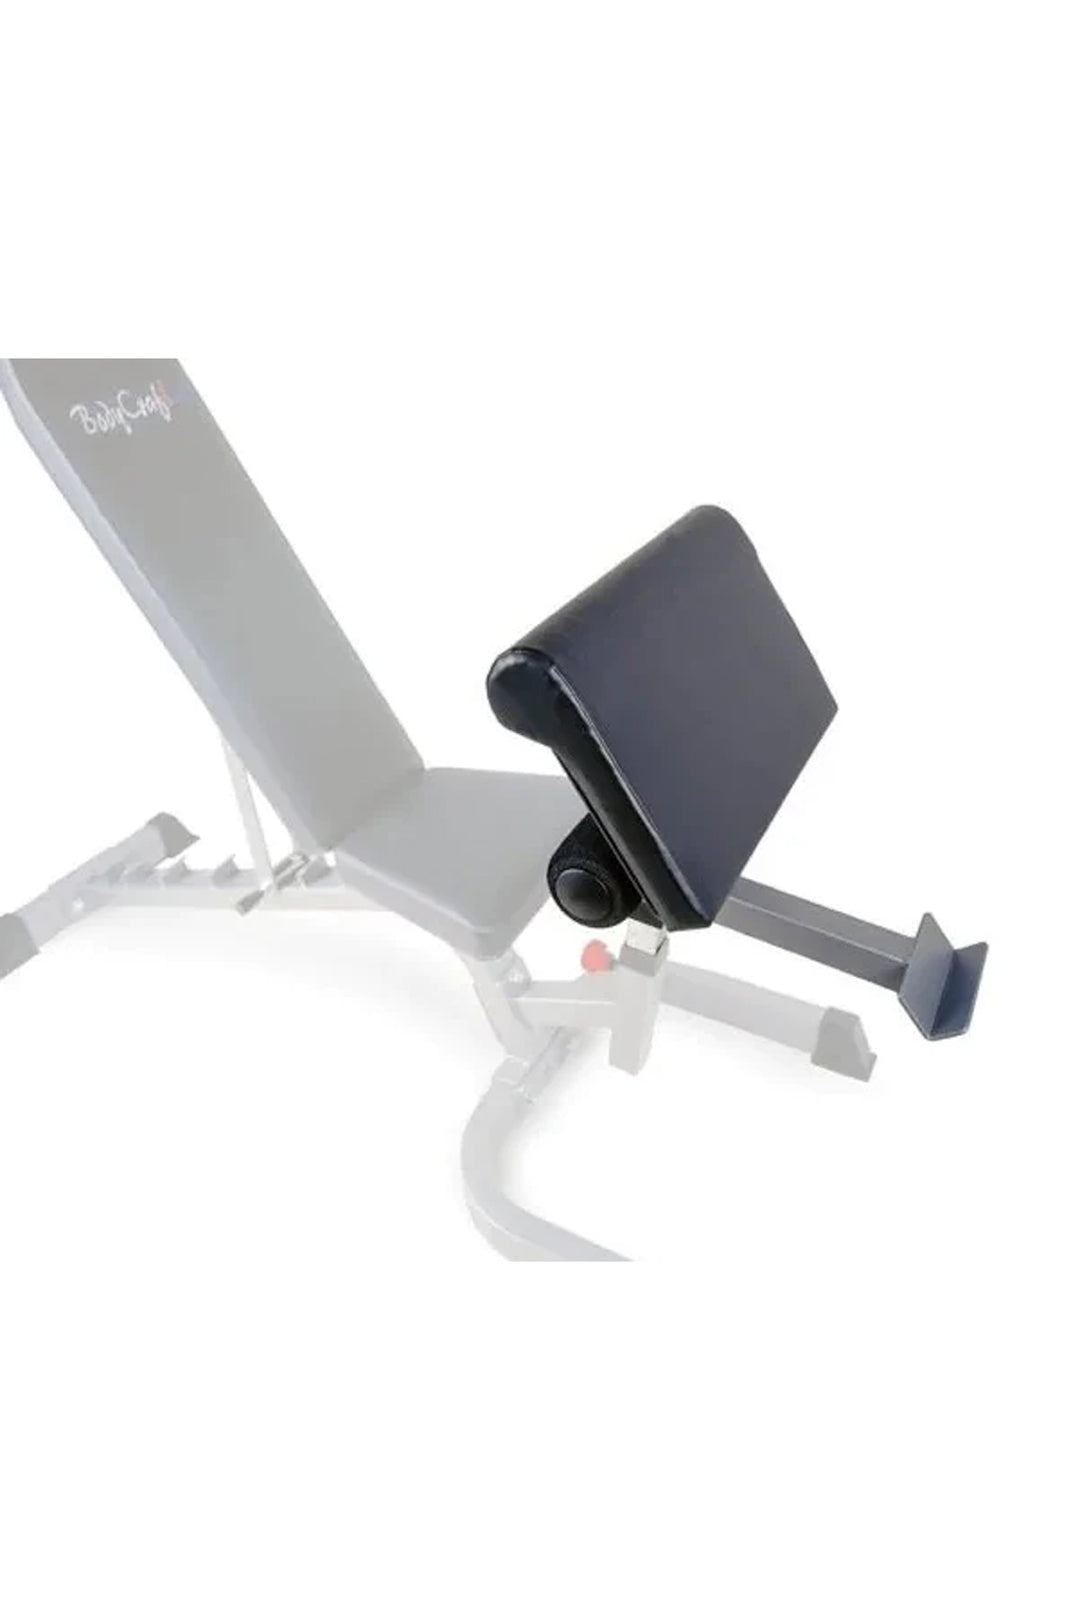 preacher pad attachment secured to weight bench 